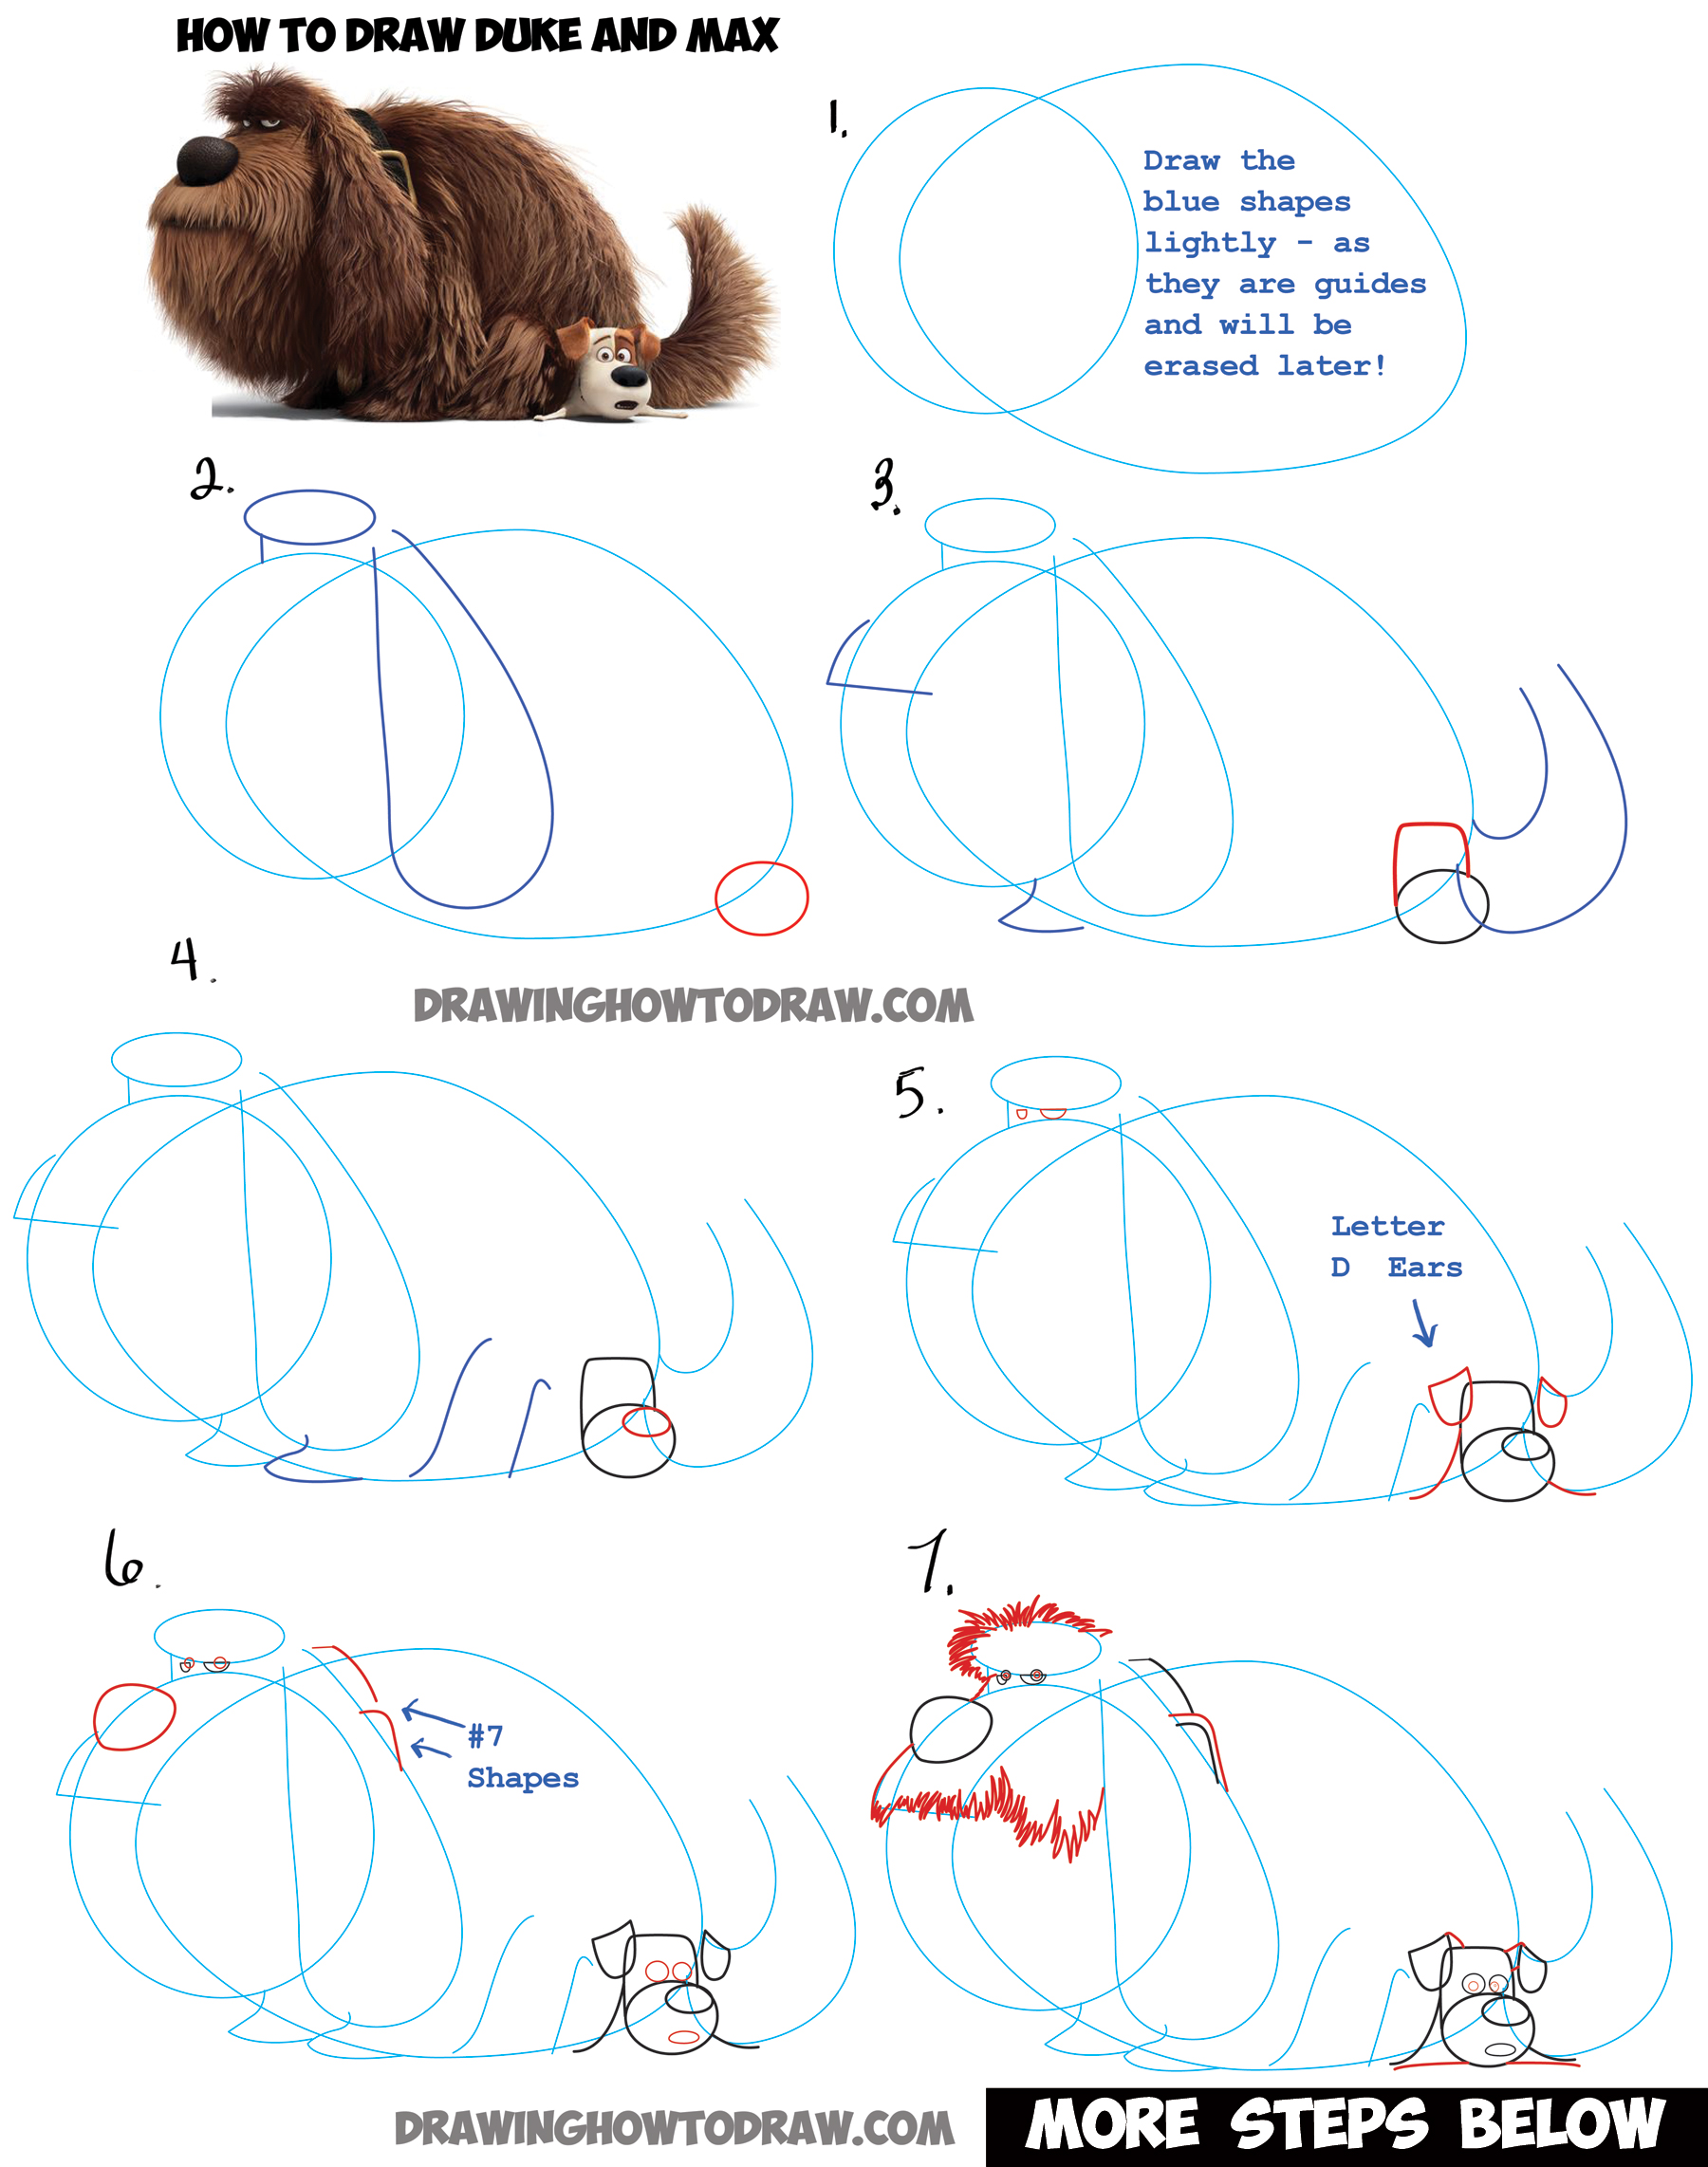 Learn How to Draw Duke Sitting on Max from The Secret Life of Pets - Step by Step Drawing Lesson for Kids